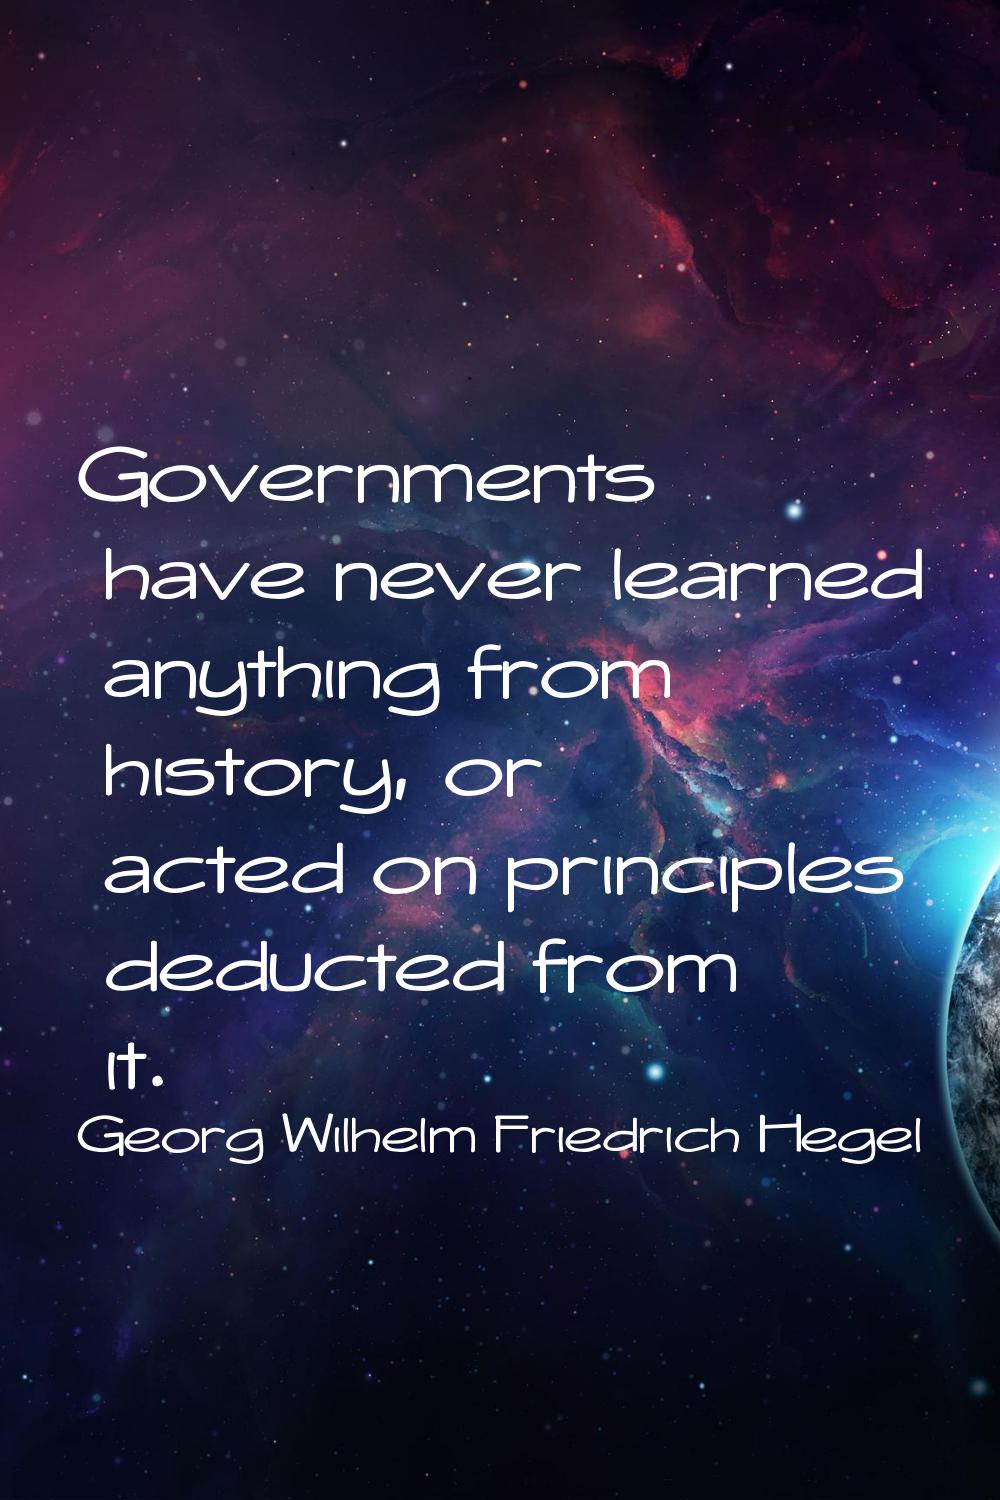 Governments have never learned anything from history, or acted on principles deducted from it.